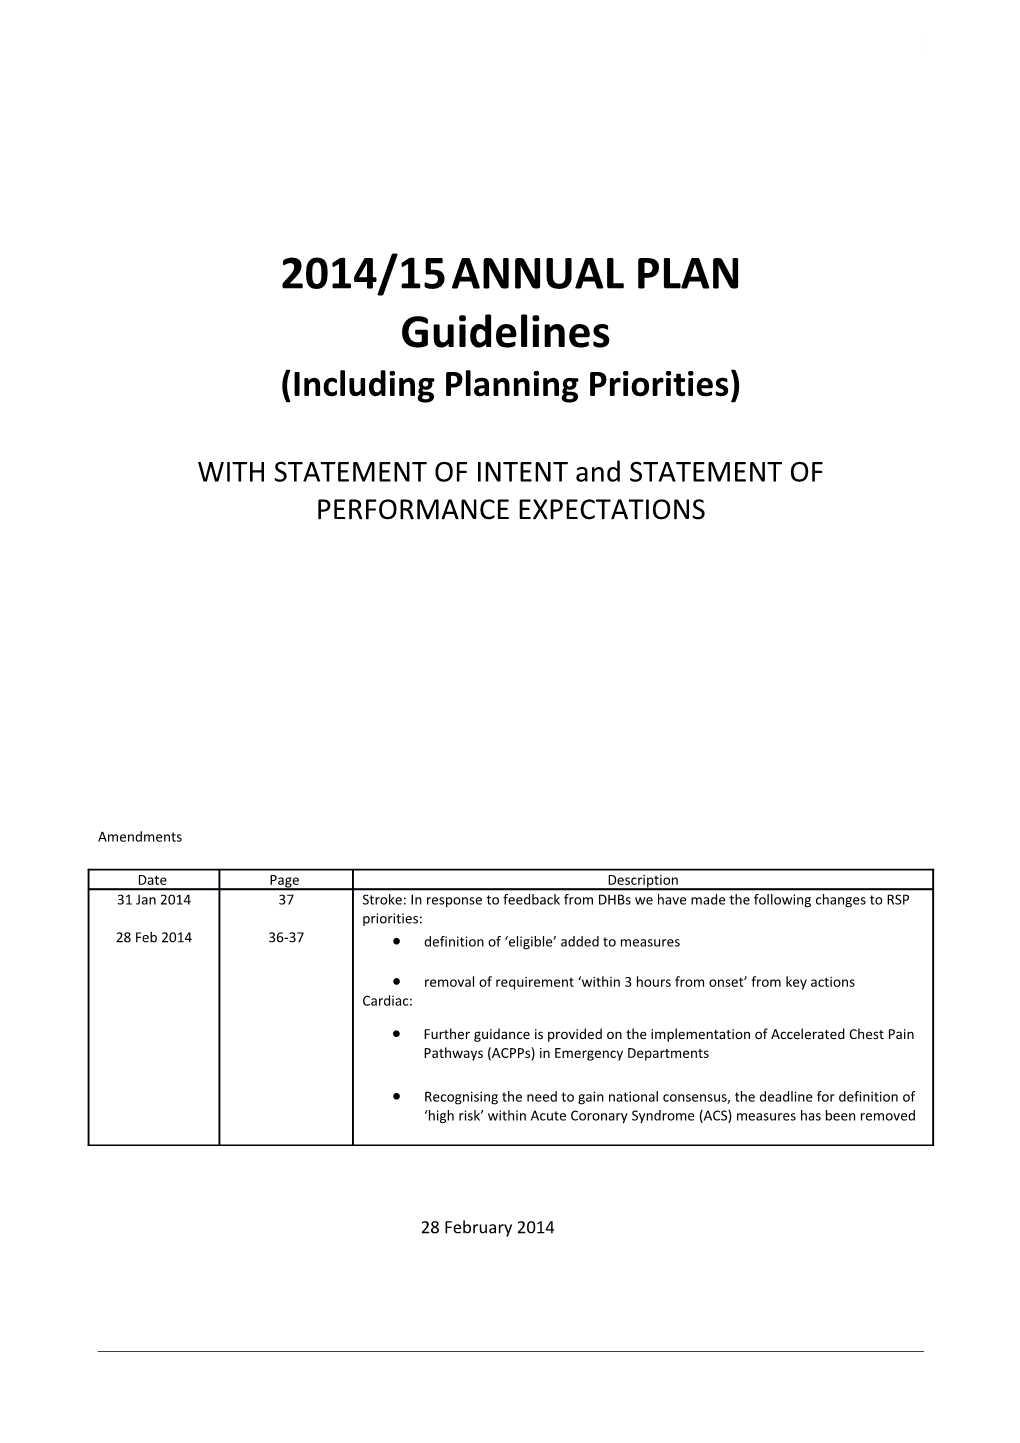 The District Health Board Annual Plan with Statement of Intent